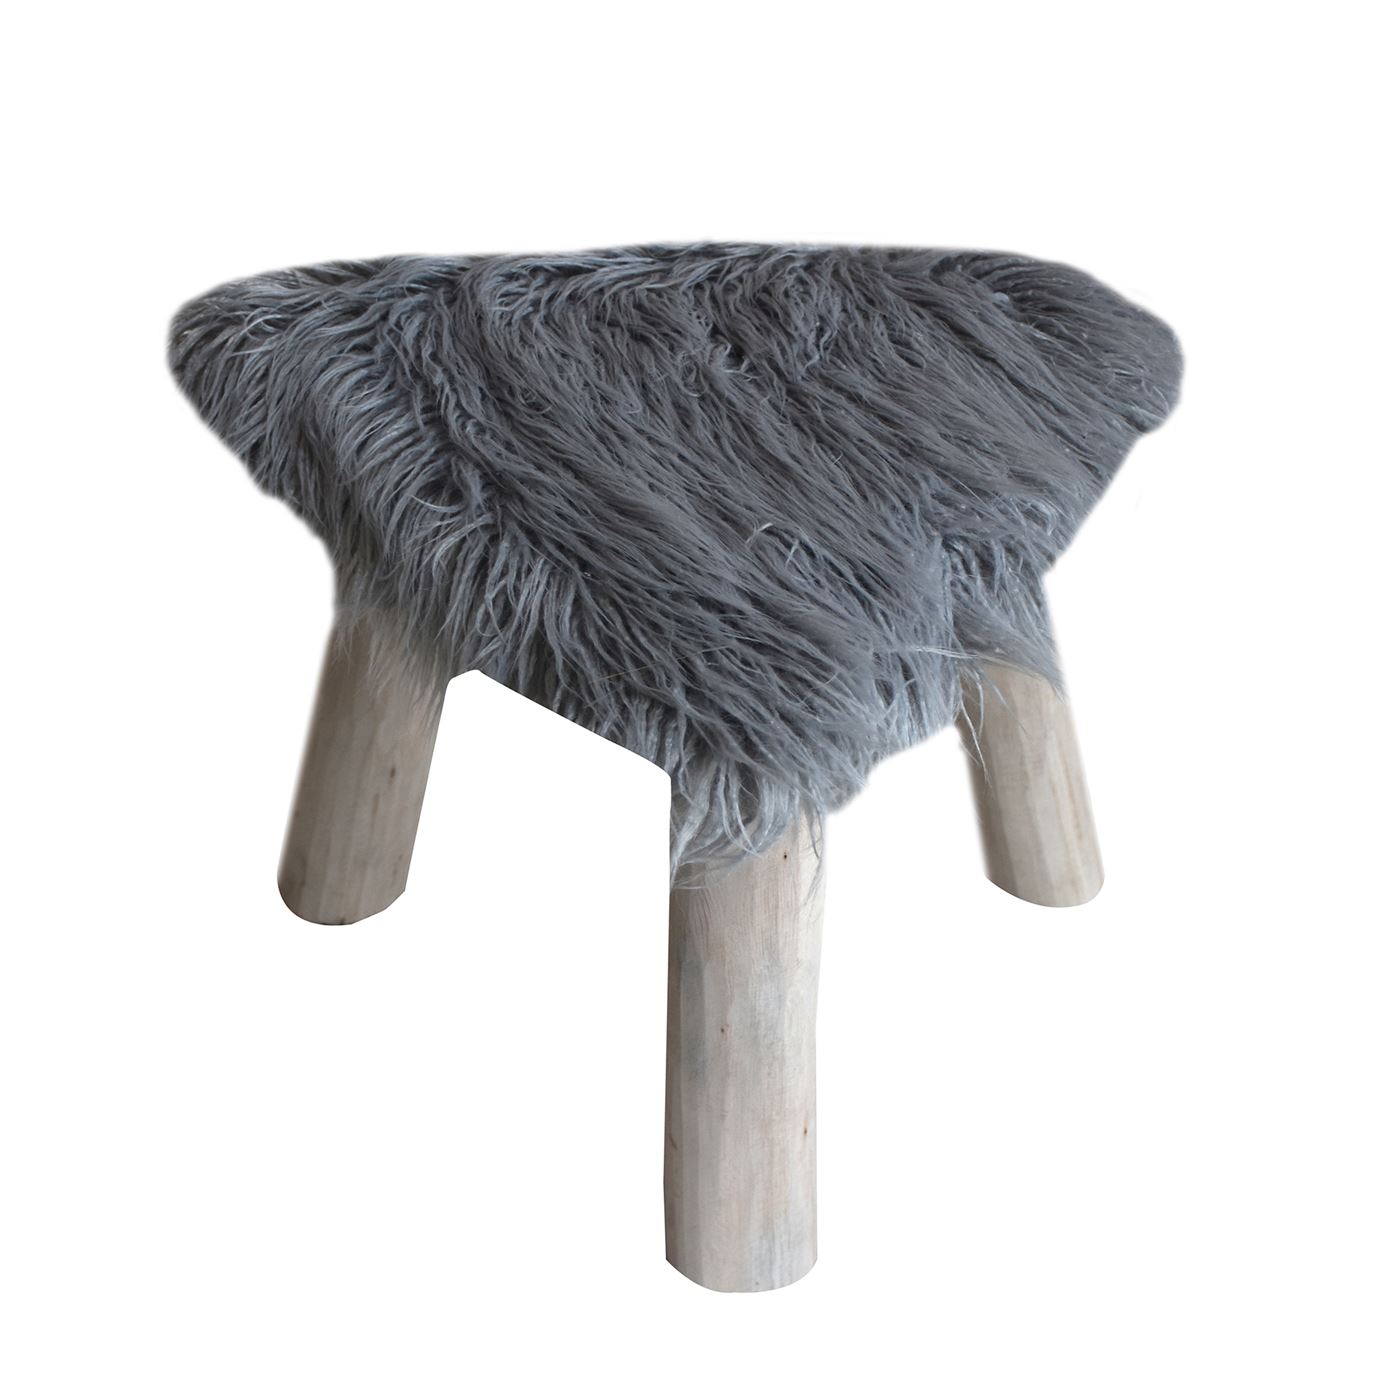 Sewells Trio Stool,  Faux Leather, Grey, Hm Stitching, Flat Weave 